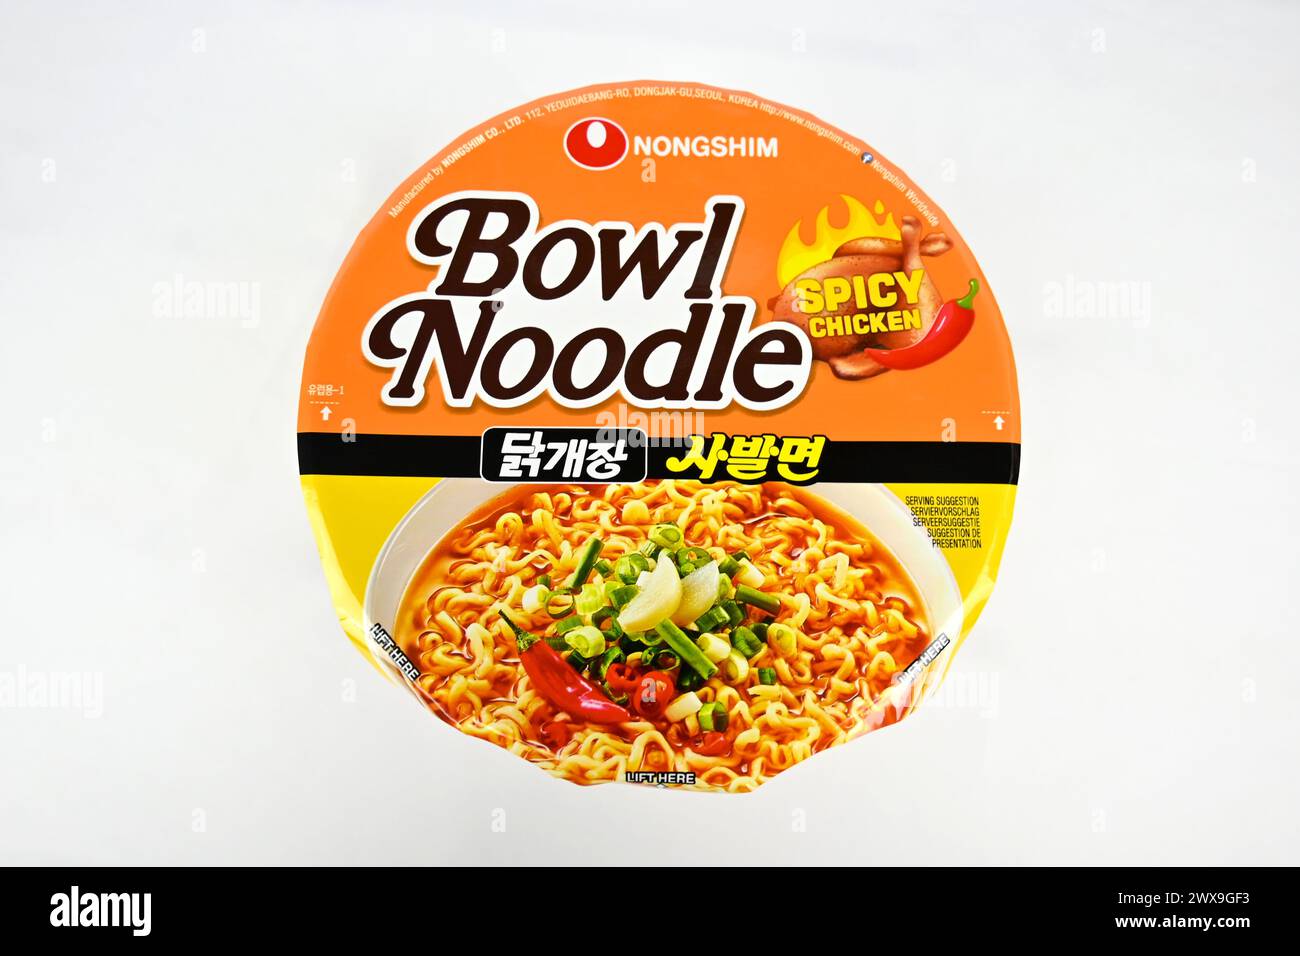 Nongshim Bowl Noodle Spicy Chicken top - Wales, UK - 23 March 2024 Stock Photo